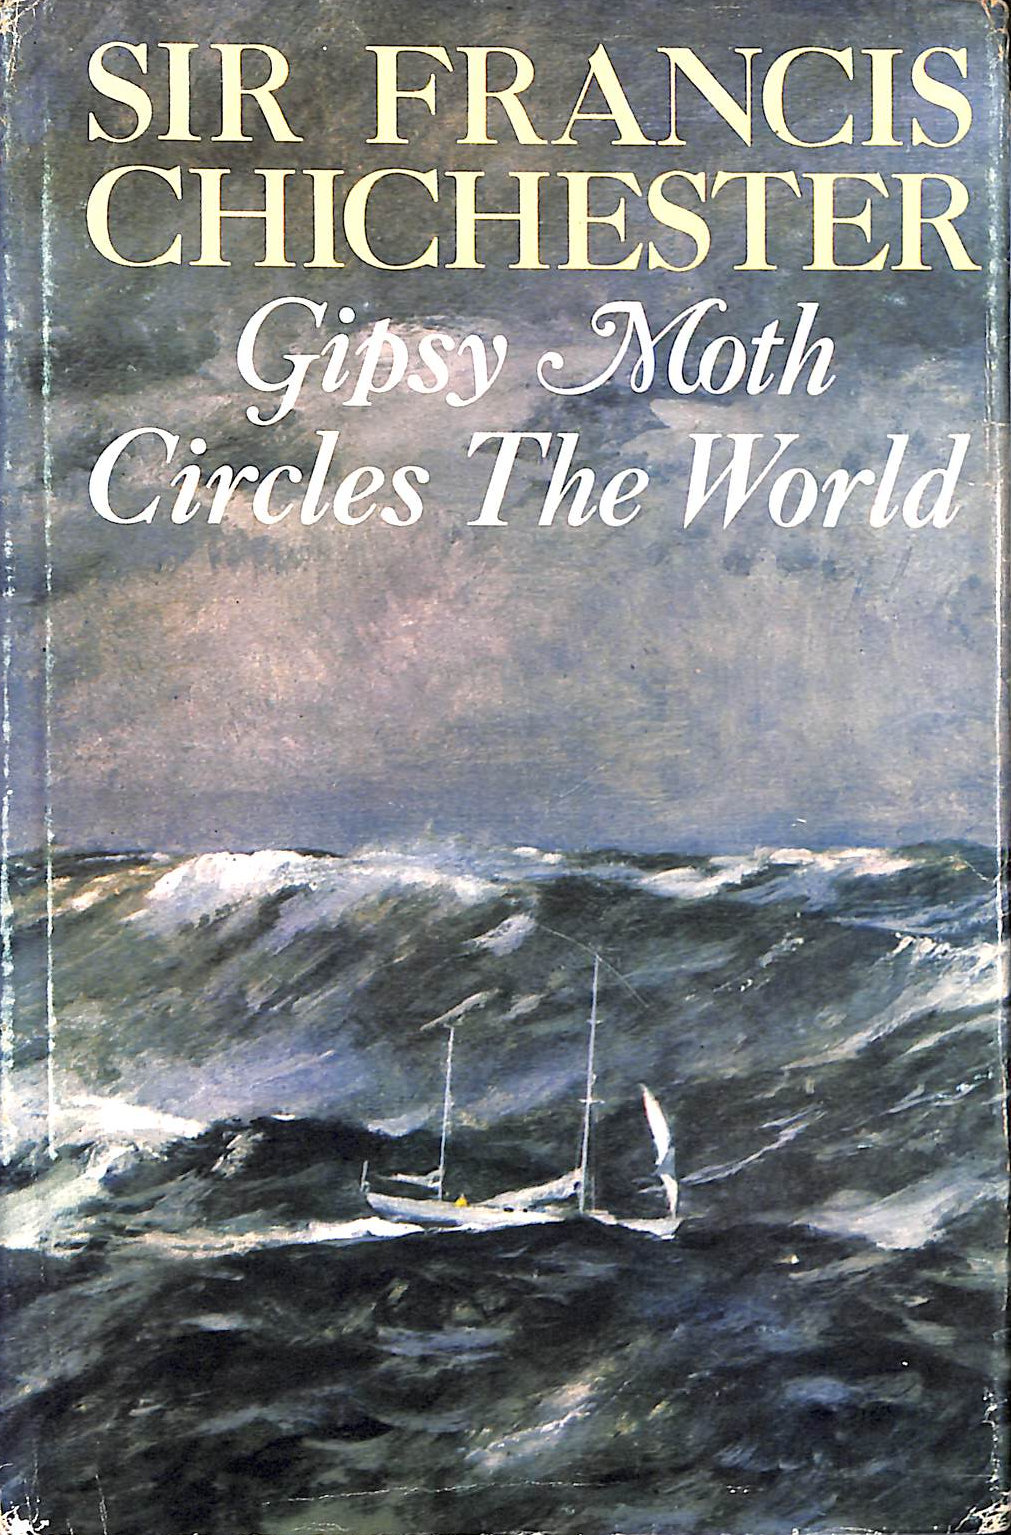 SIR FRANCIS CHICHESTER - Gipsy Moth Circles the World